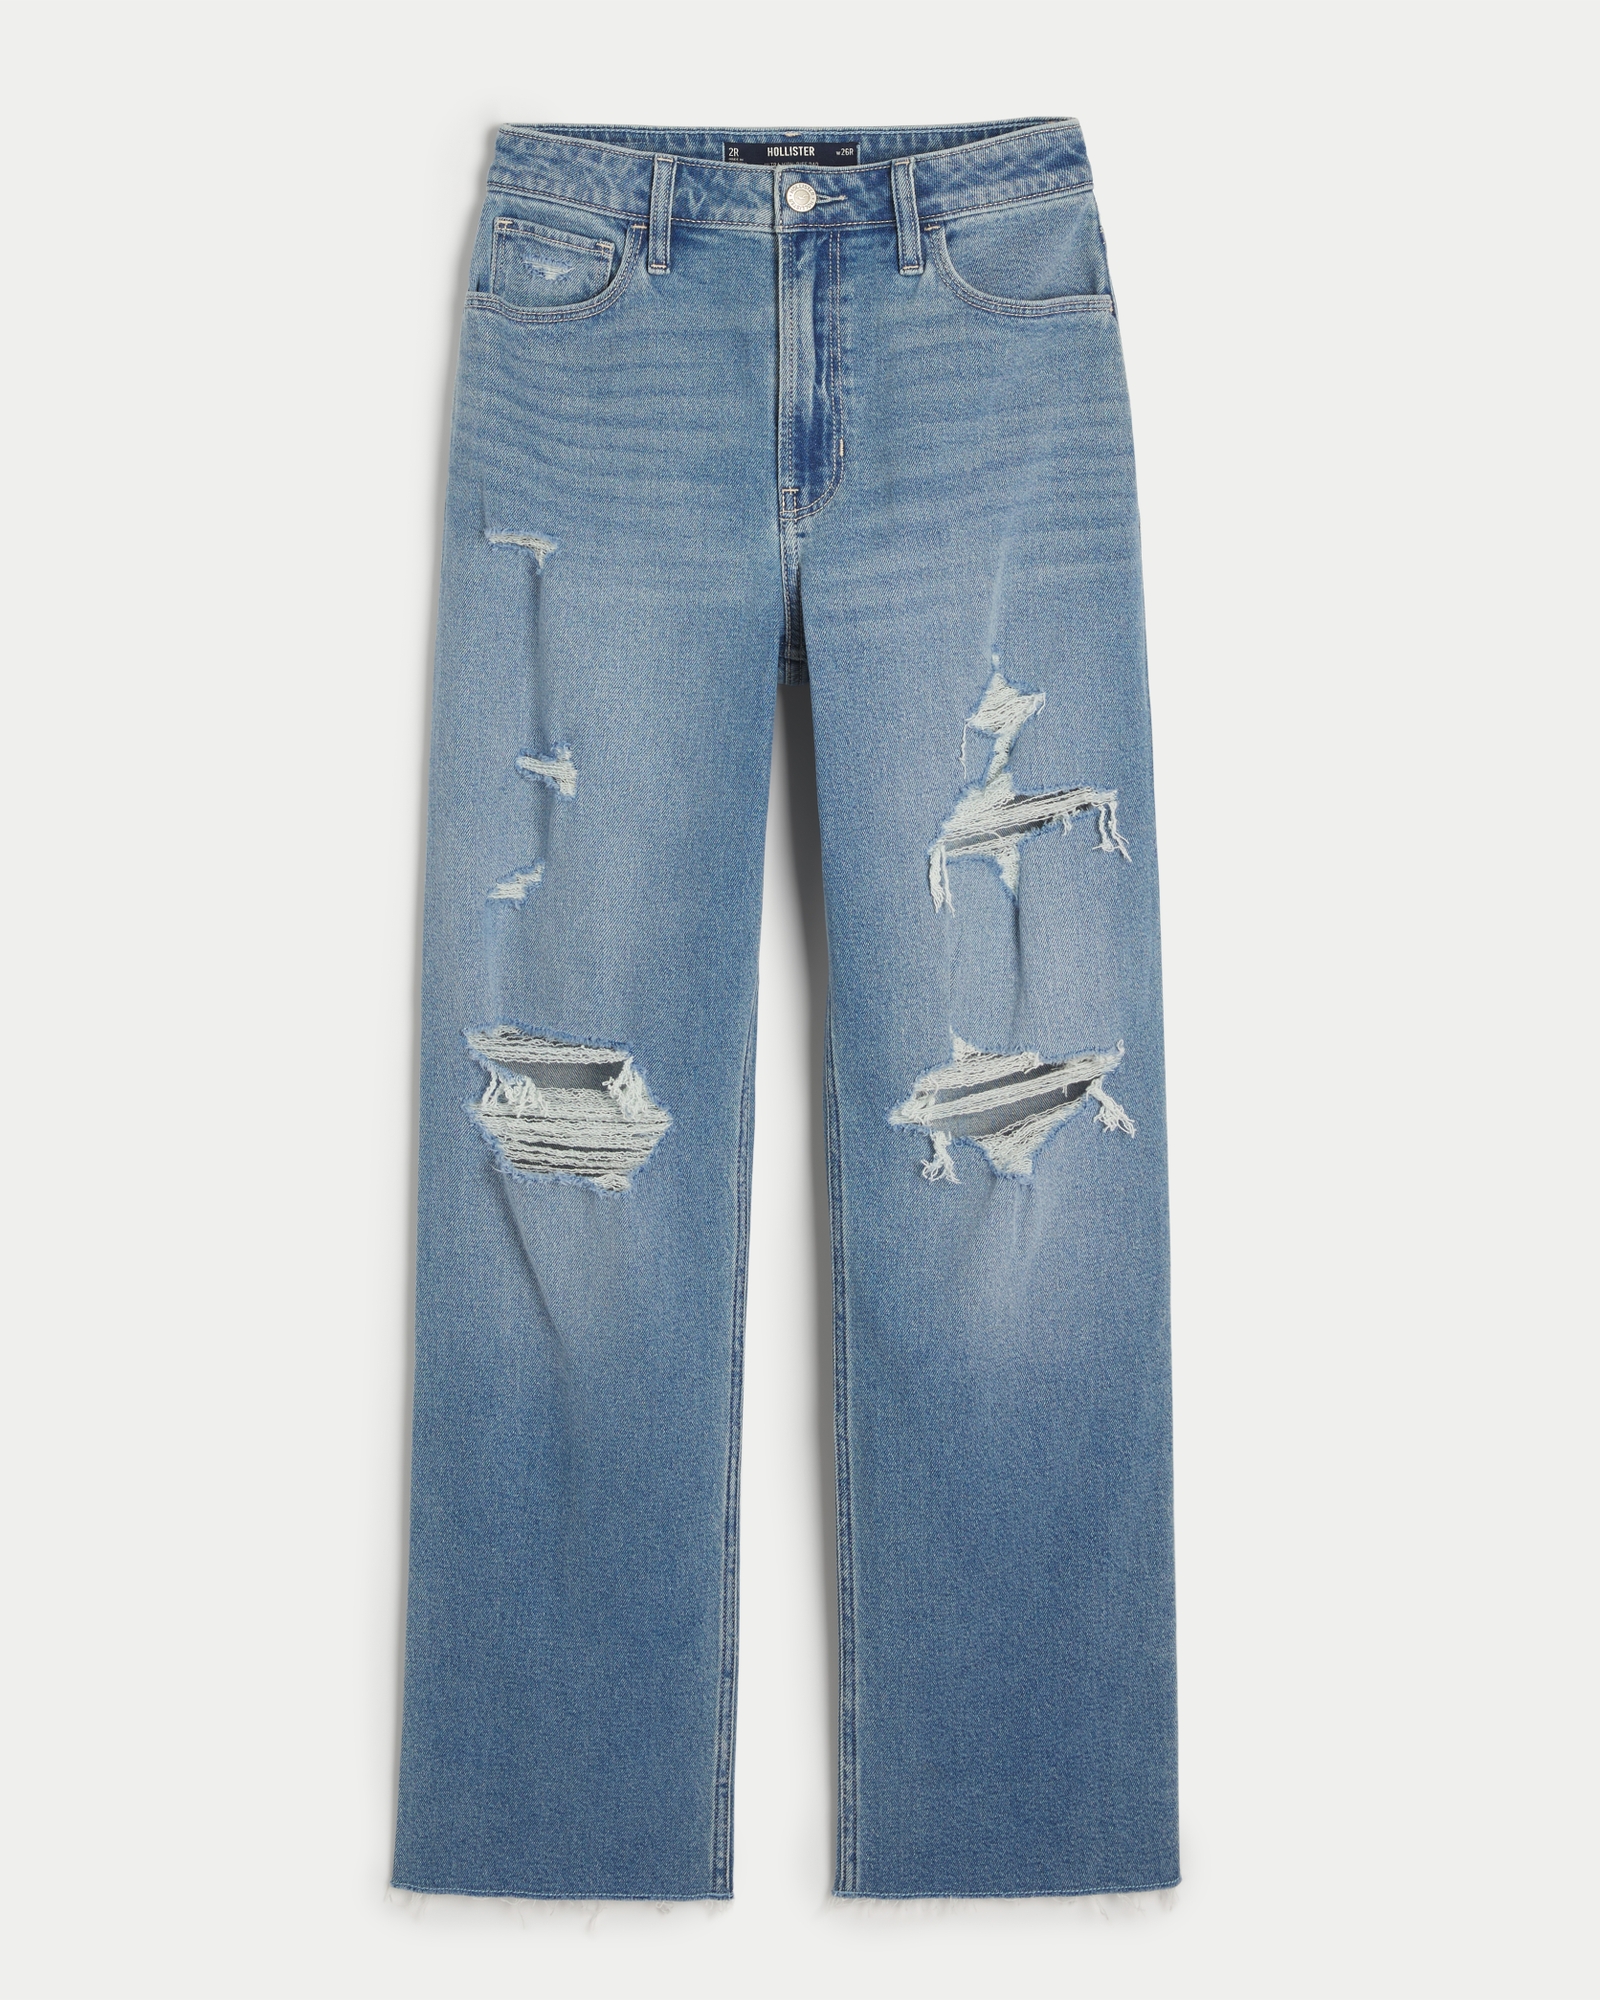 Women's Ultra High-Rise Ripped Light Wash Dad Jeans - Hollister Co.